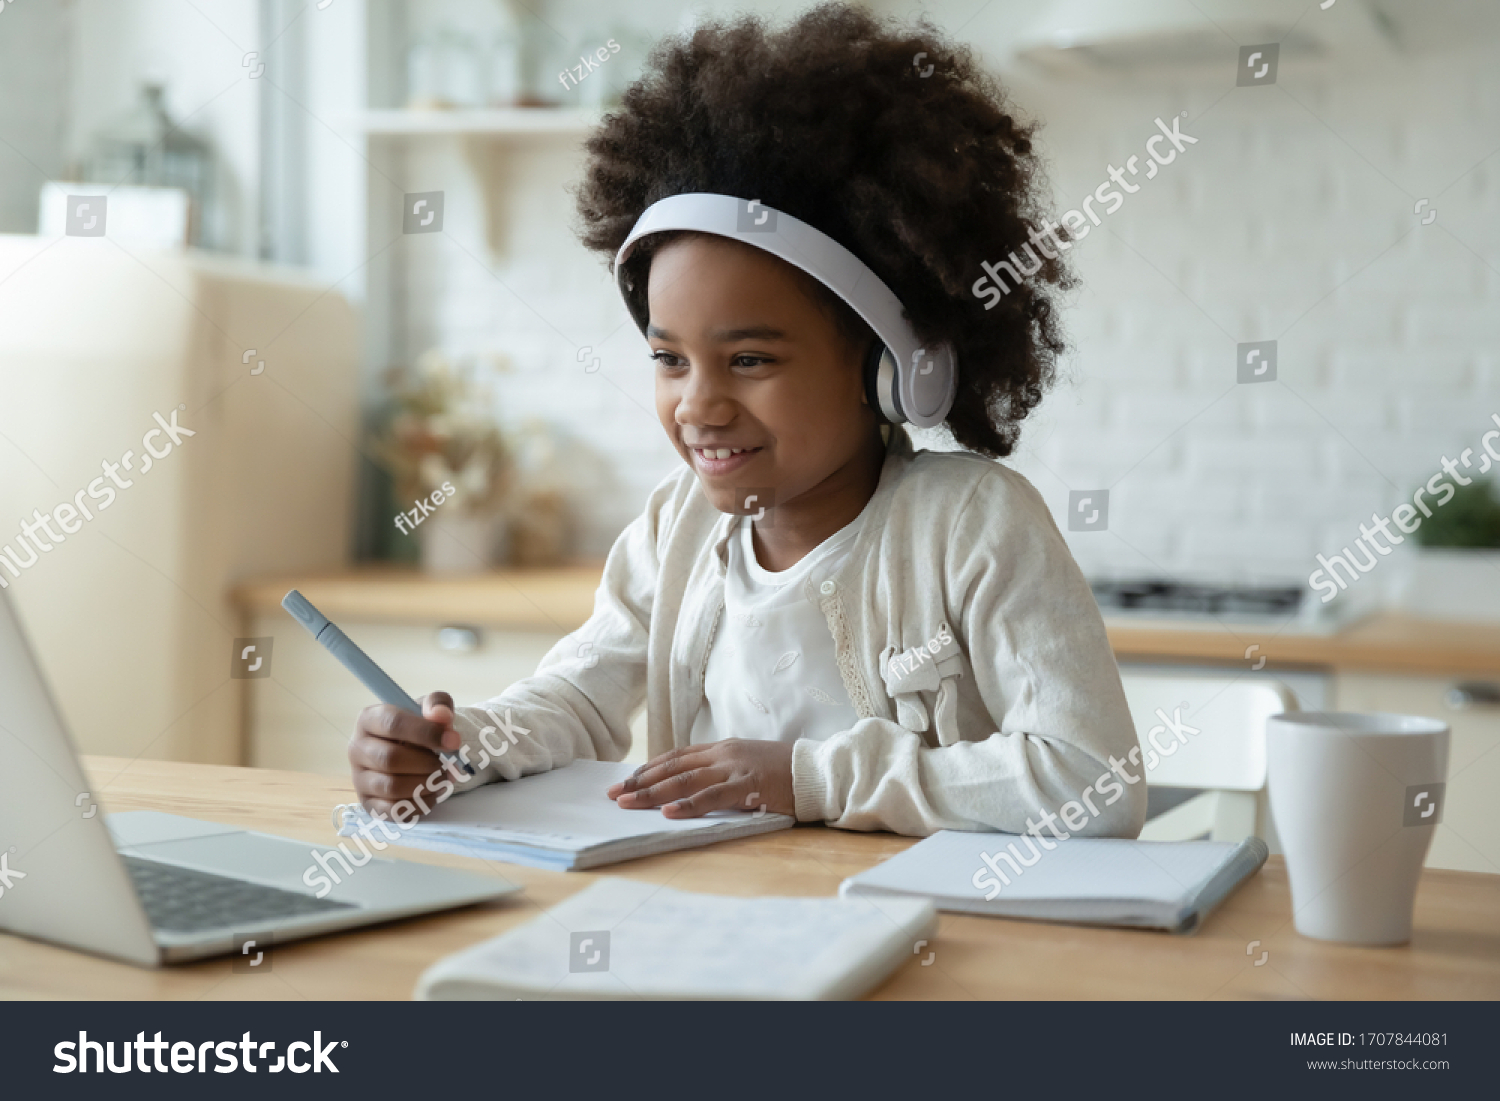 Smiling small African American girl in headphones watch video lesson on computer in kitchen, happy little biracial child in earphones have online web class using laptop at home, homeschooling concept #1707844081